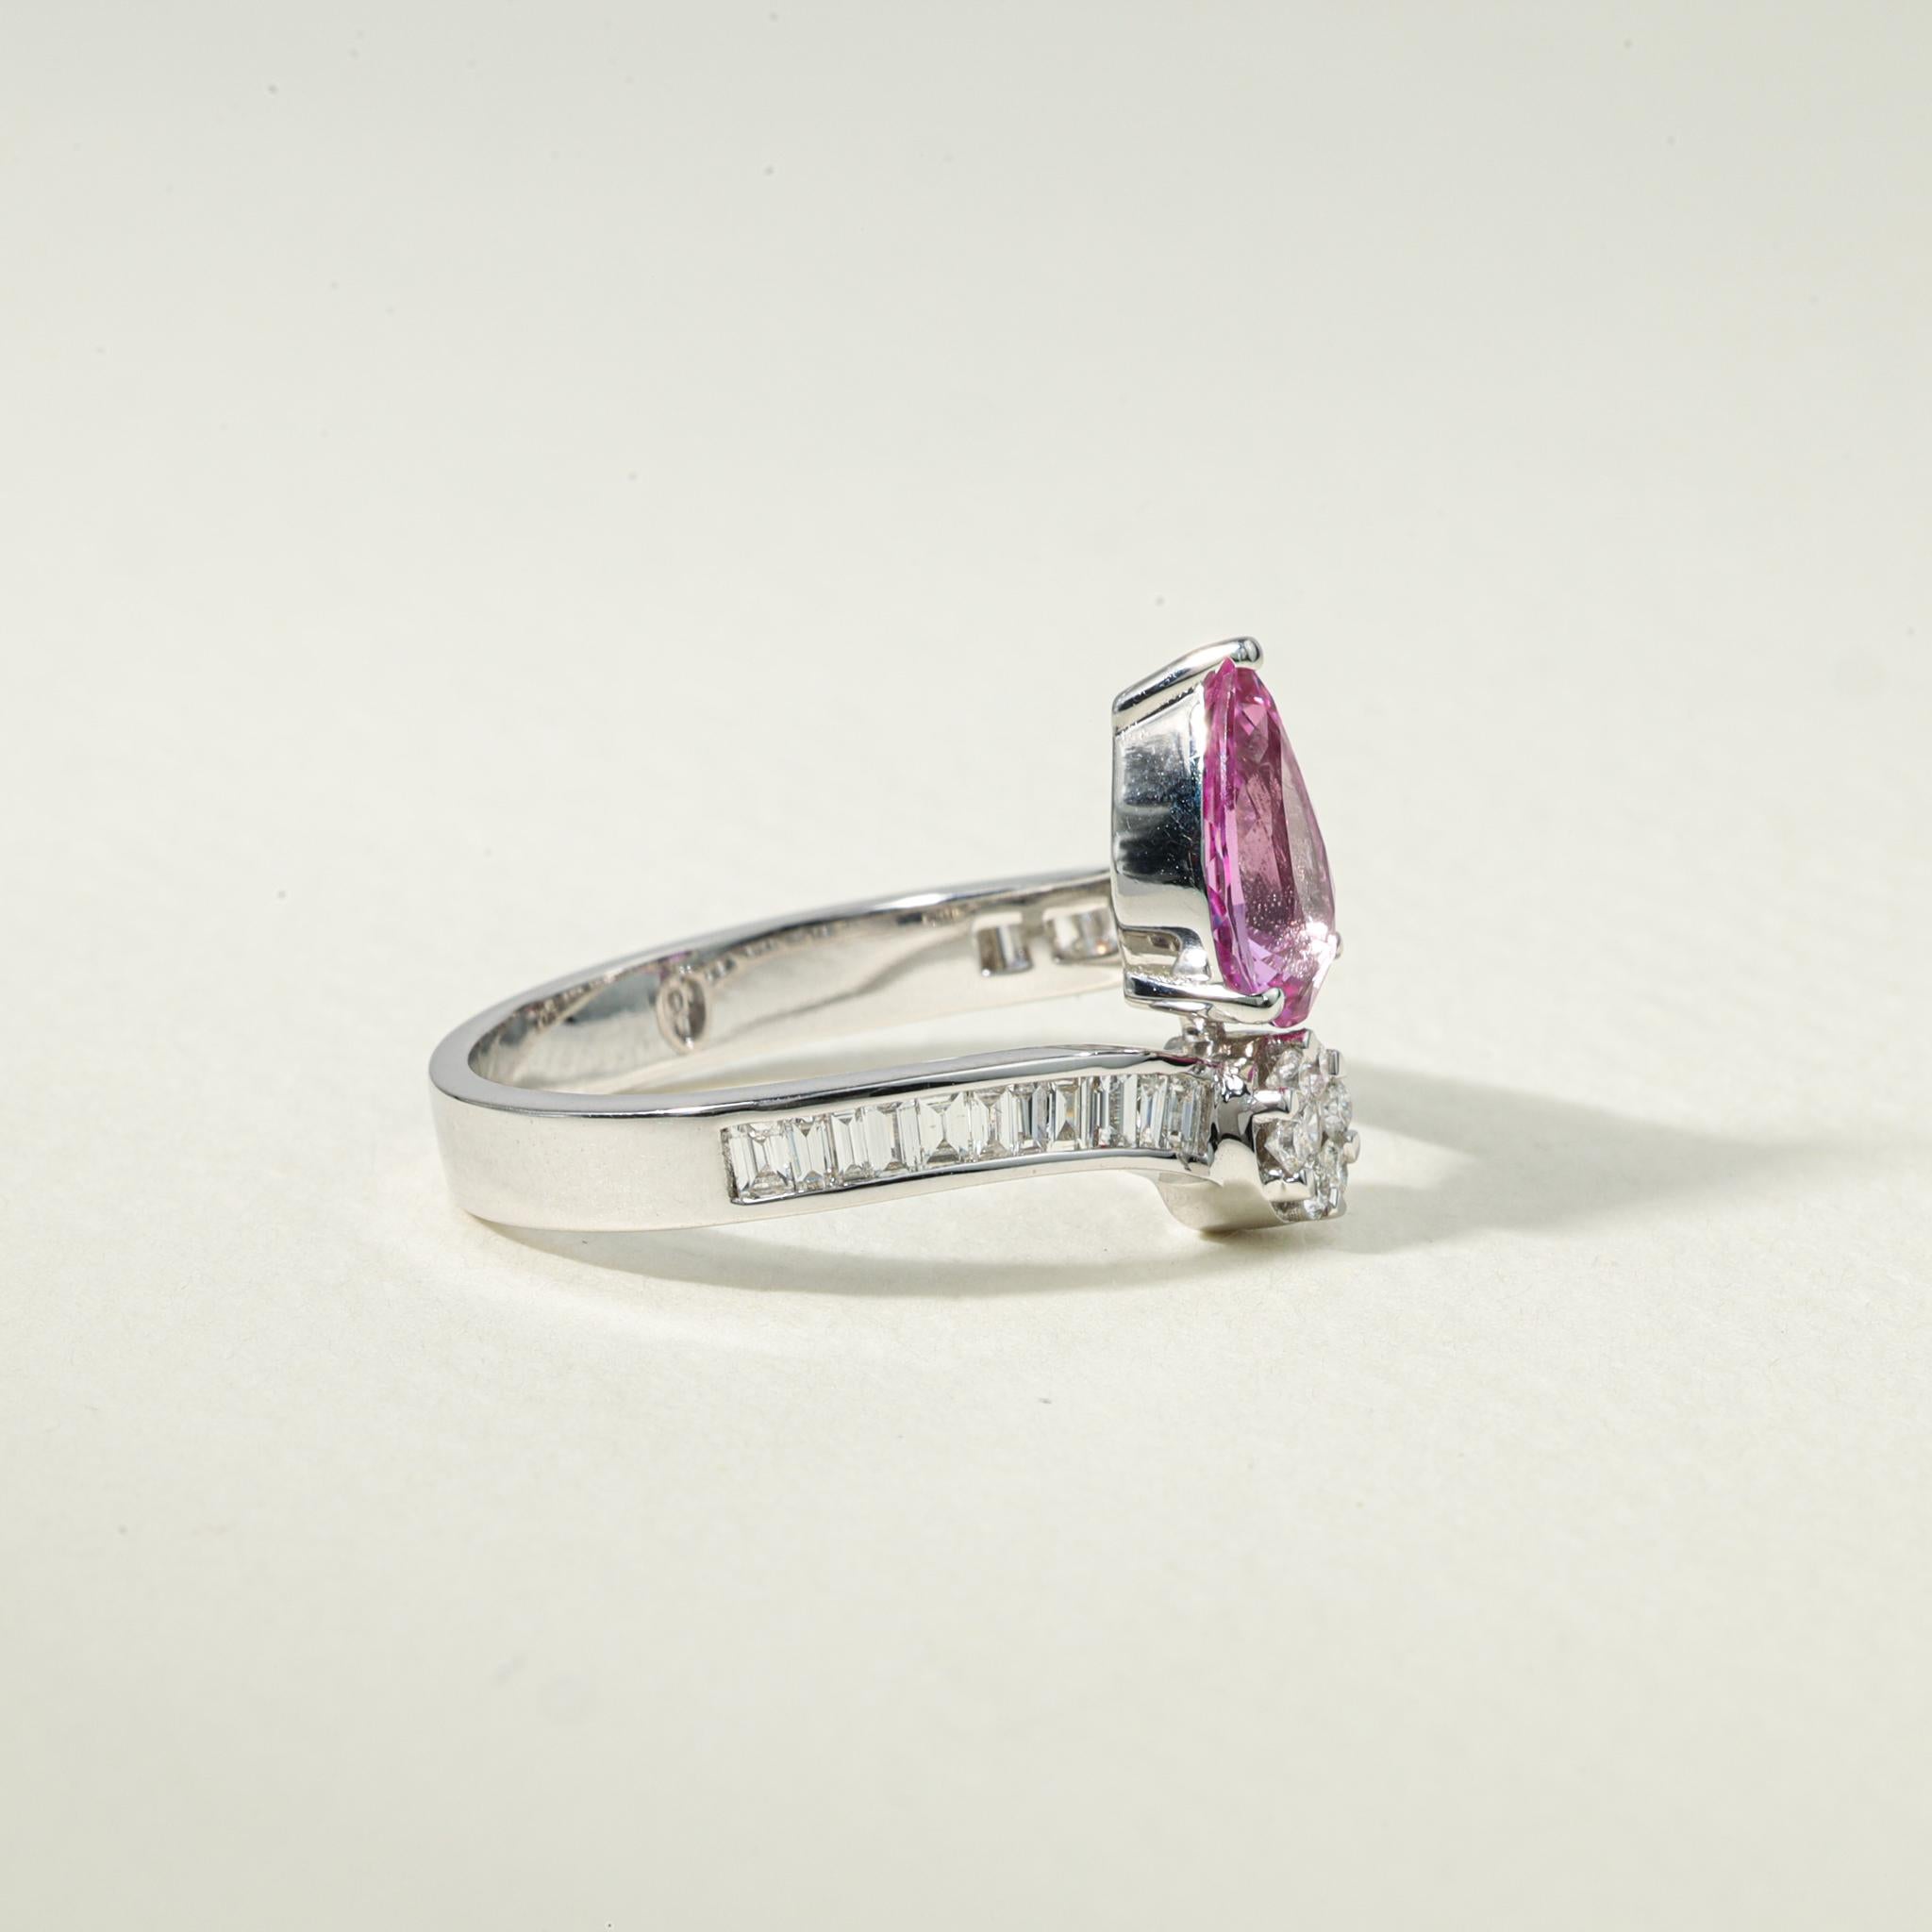 1.5 Carat Pear Pink Sapphire Diamond Cocktail Engagement Ring in 18k White Gold en vente 1